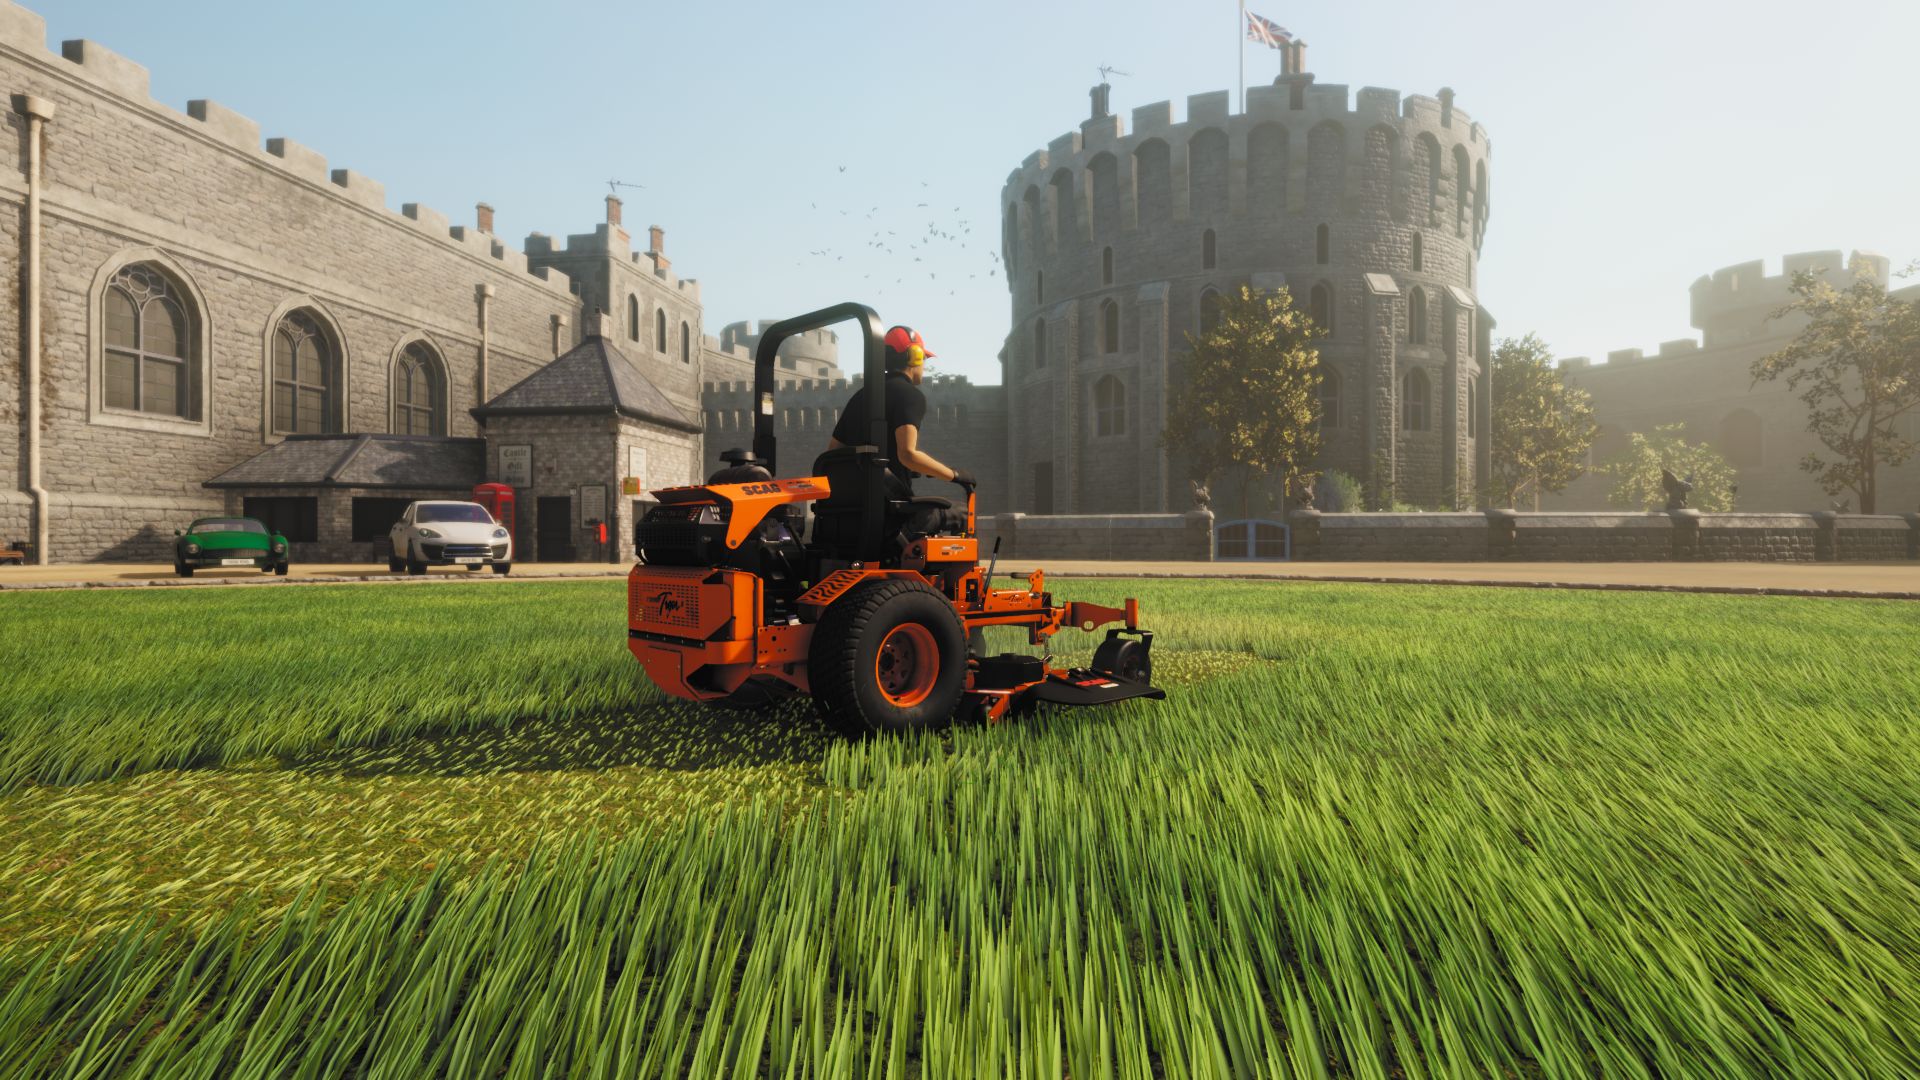 lawn-mowing-simulator-revealed-as-a-new-title-from-skyhook-games-and